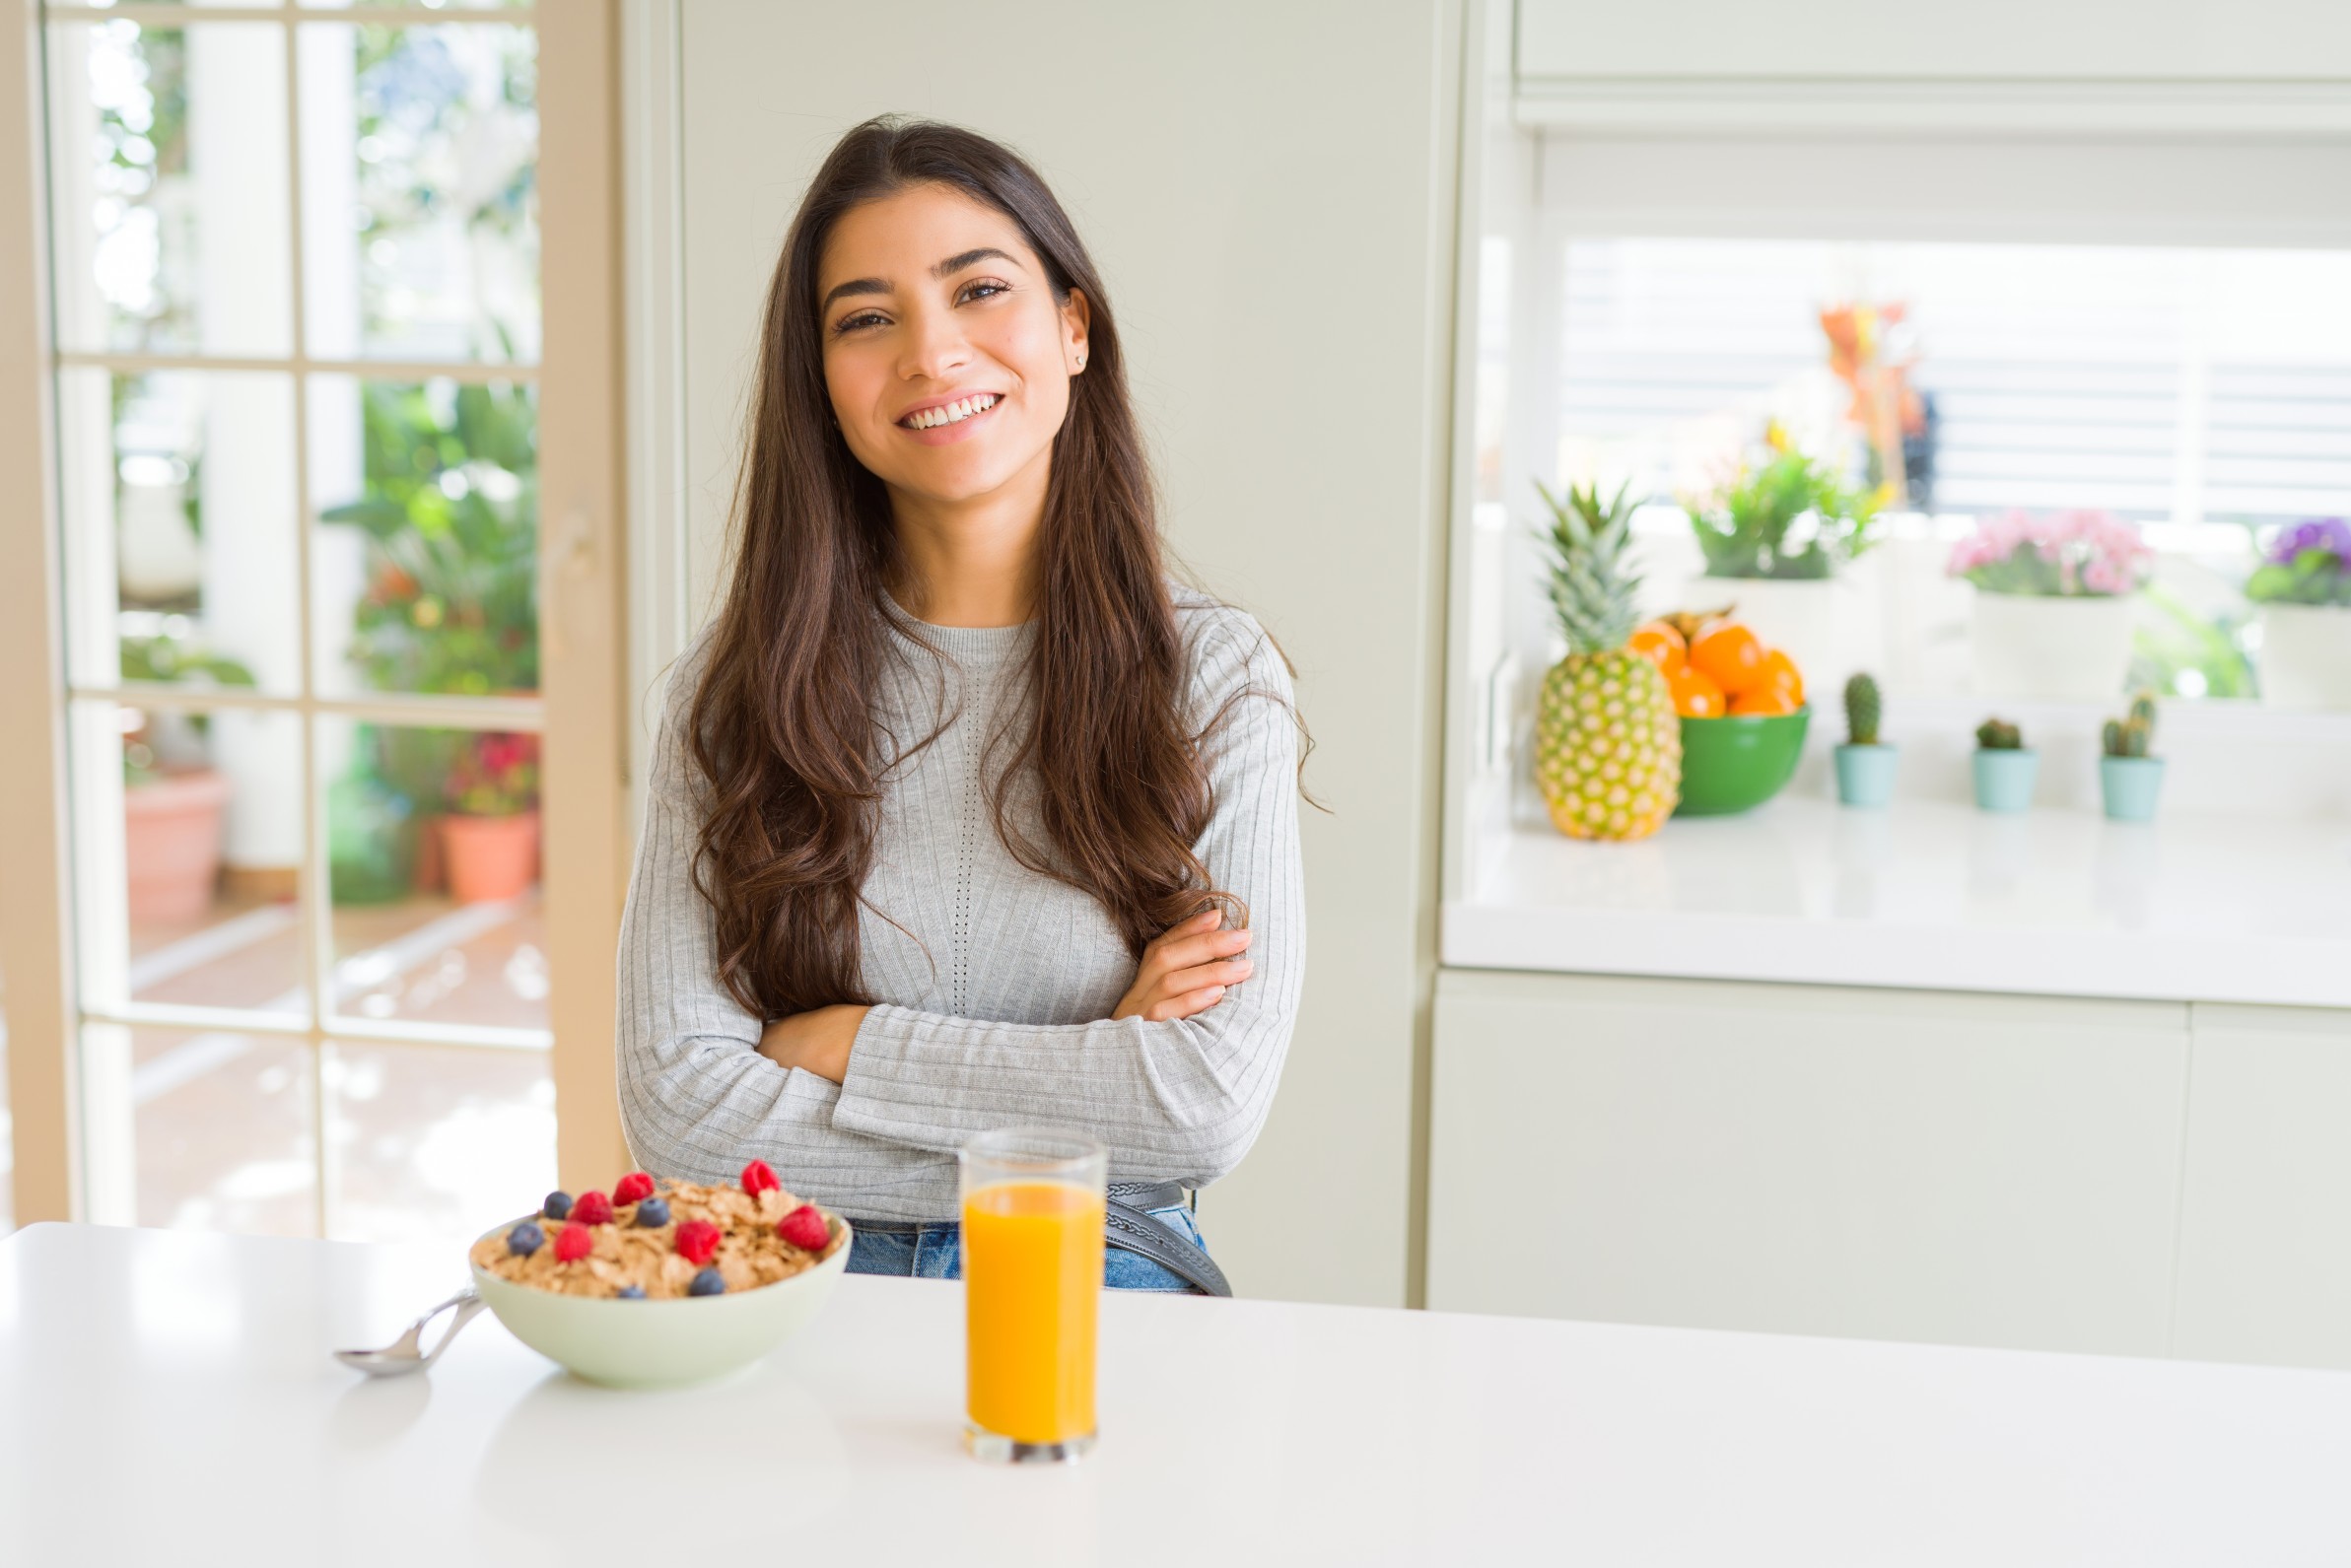 Why is nutrition important during adolescence